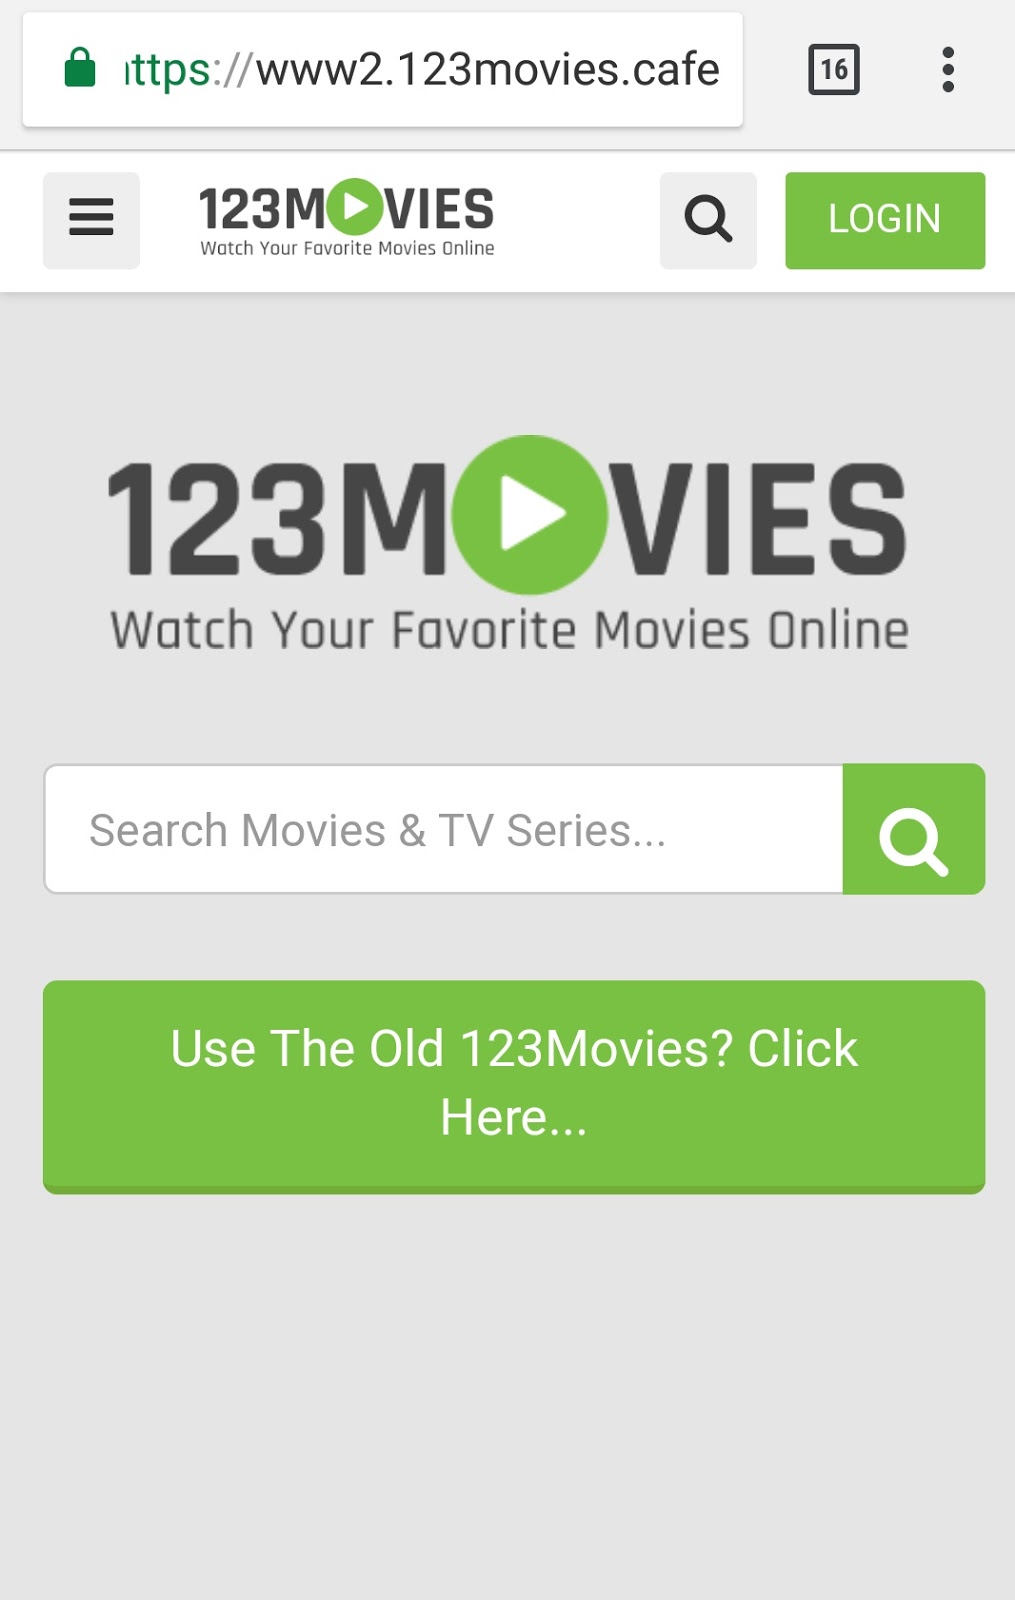 123movies cafe not working